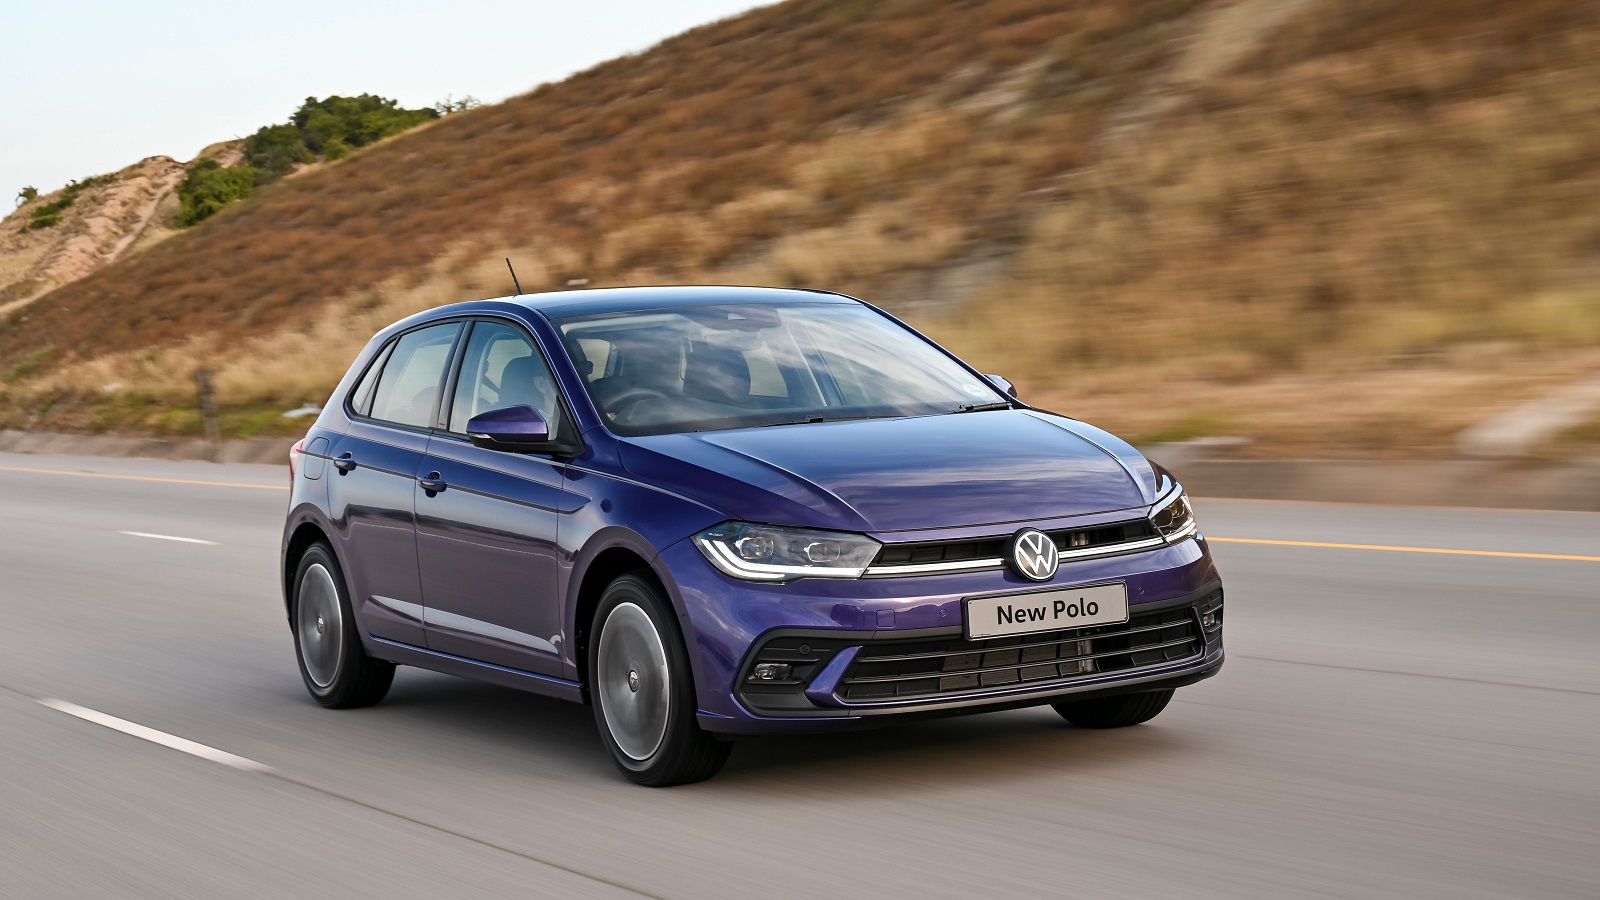 REVIEW: Volkswagen Polo Life is fundamentally great